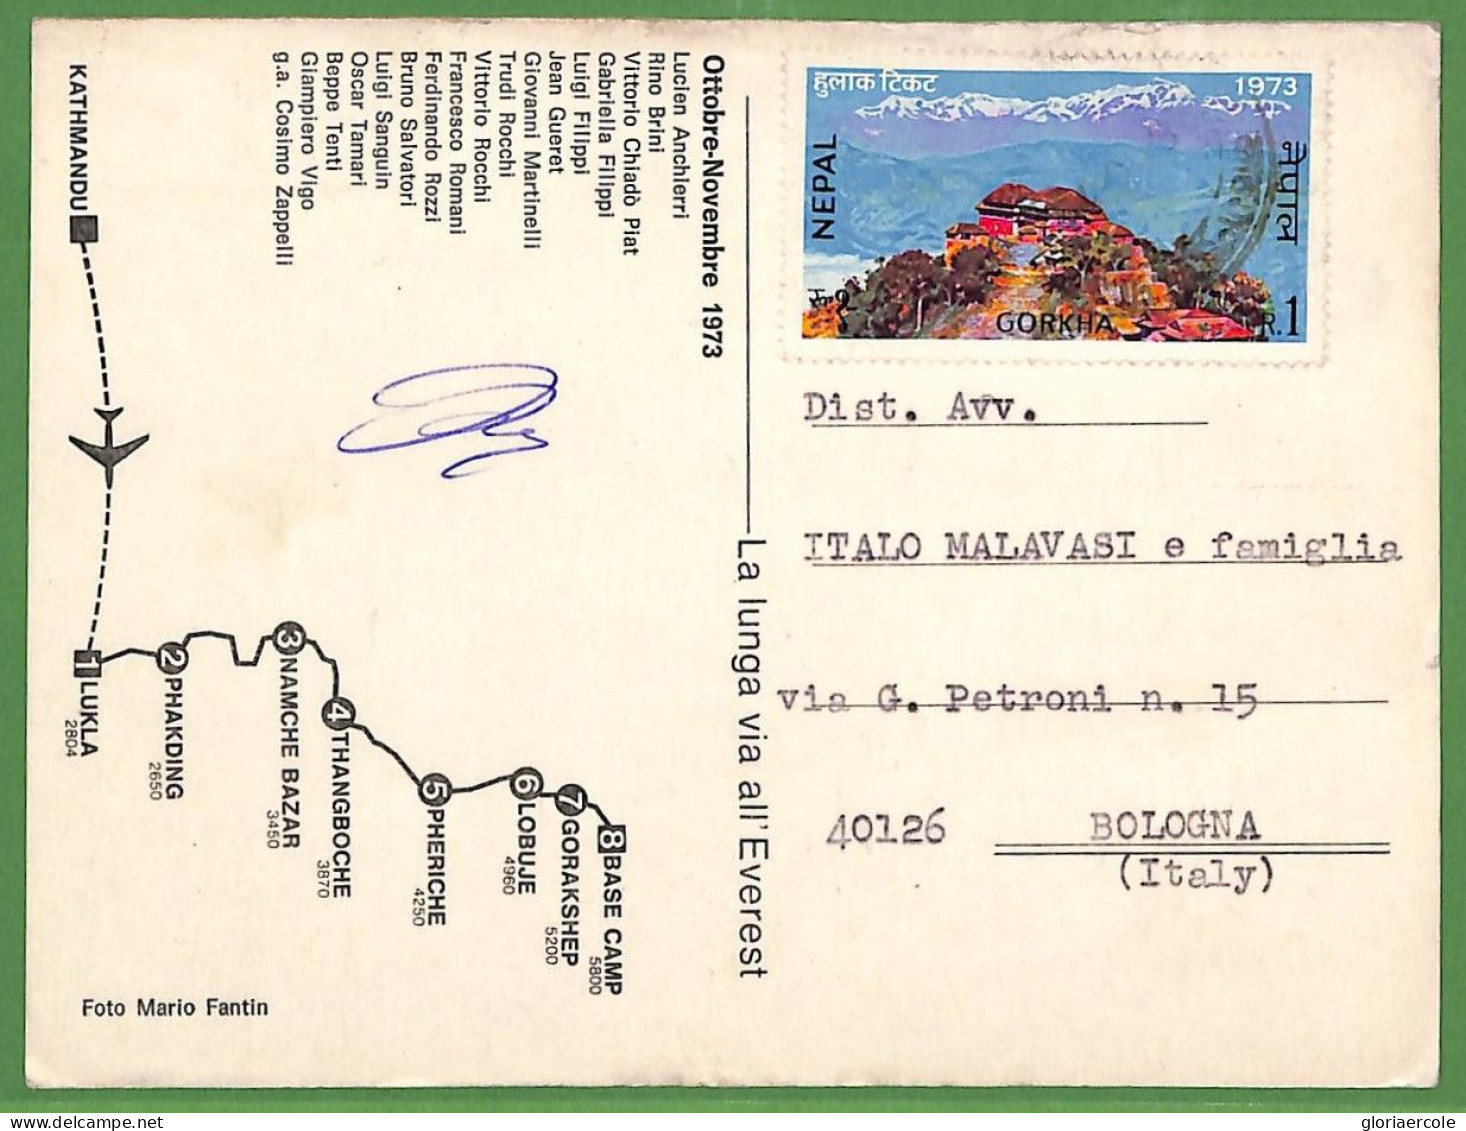 Ae3398 - NEPAL  - POSTAL HISTORY - Mountaineering EXPEDITION To EVEREST  1973 - Escalade